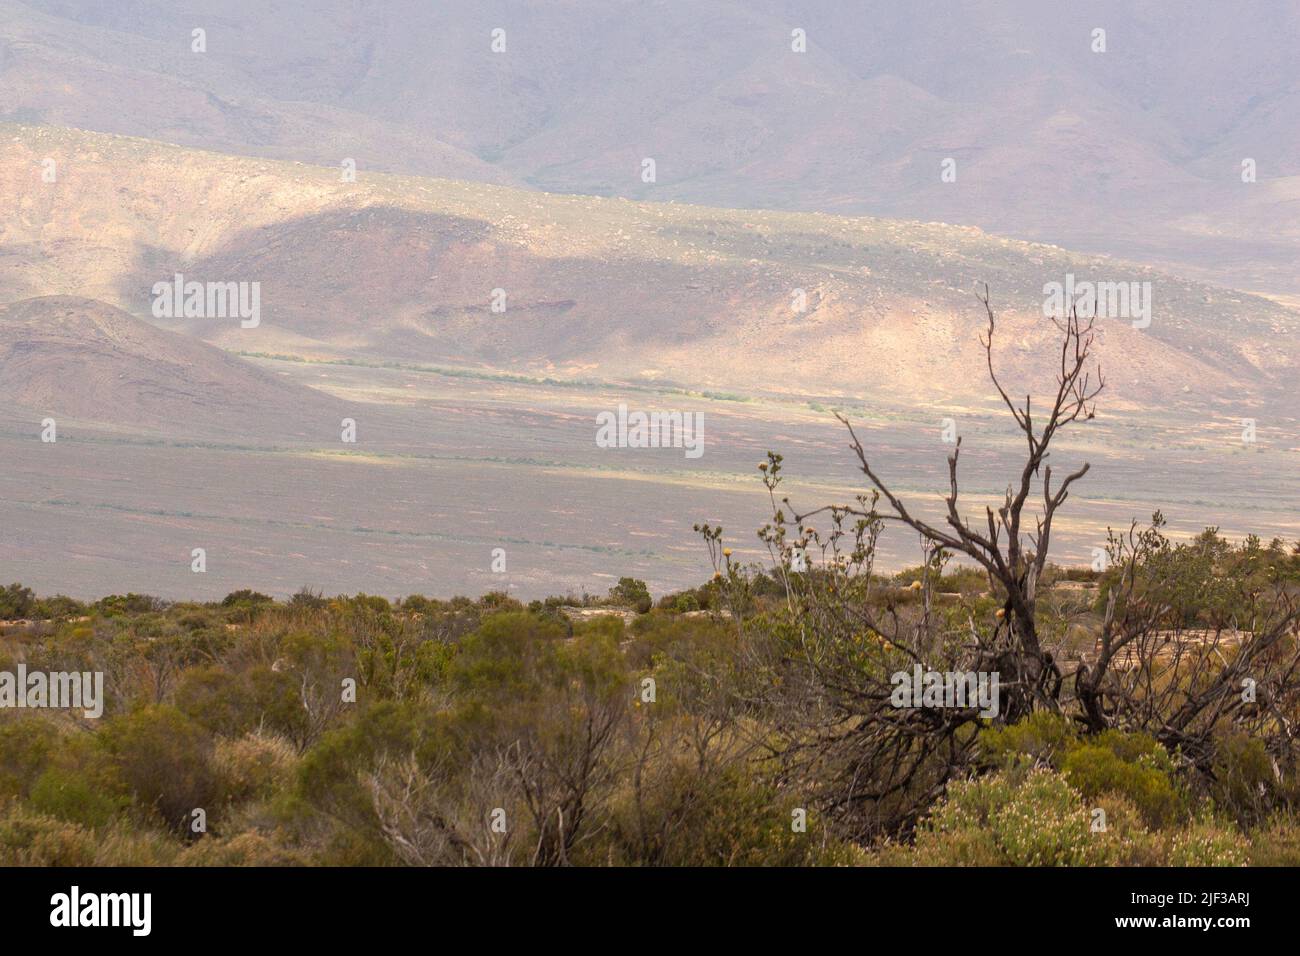 Panorama in the Oorlogskloof Nature Reserve with a tree in the foreground and mountains in the background close to Nieuwoudtville, Northern Cape Stock Photo